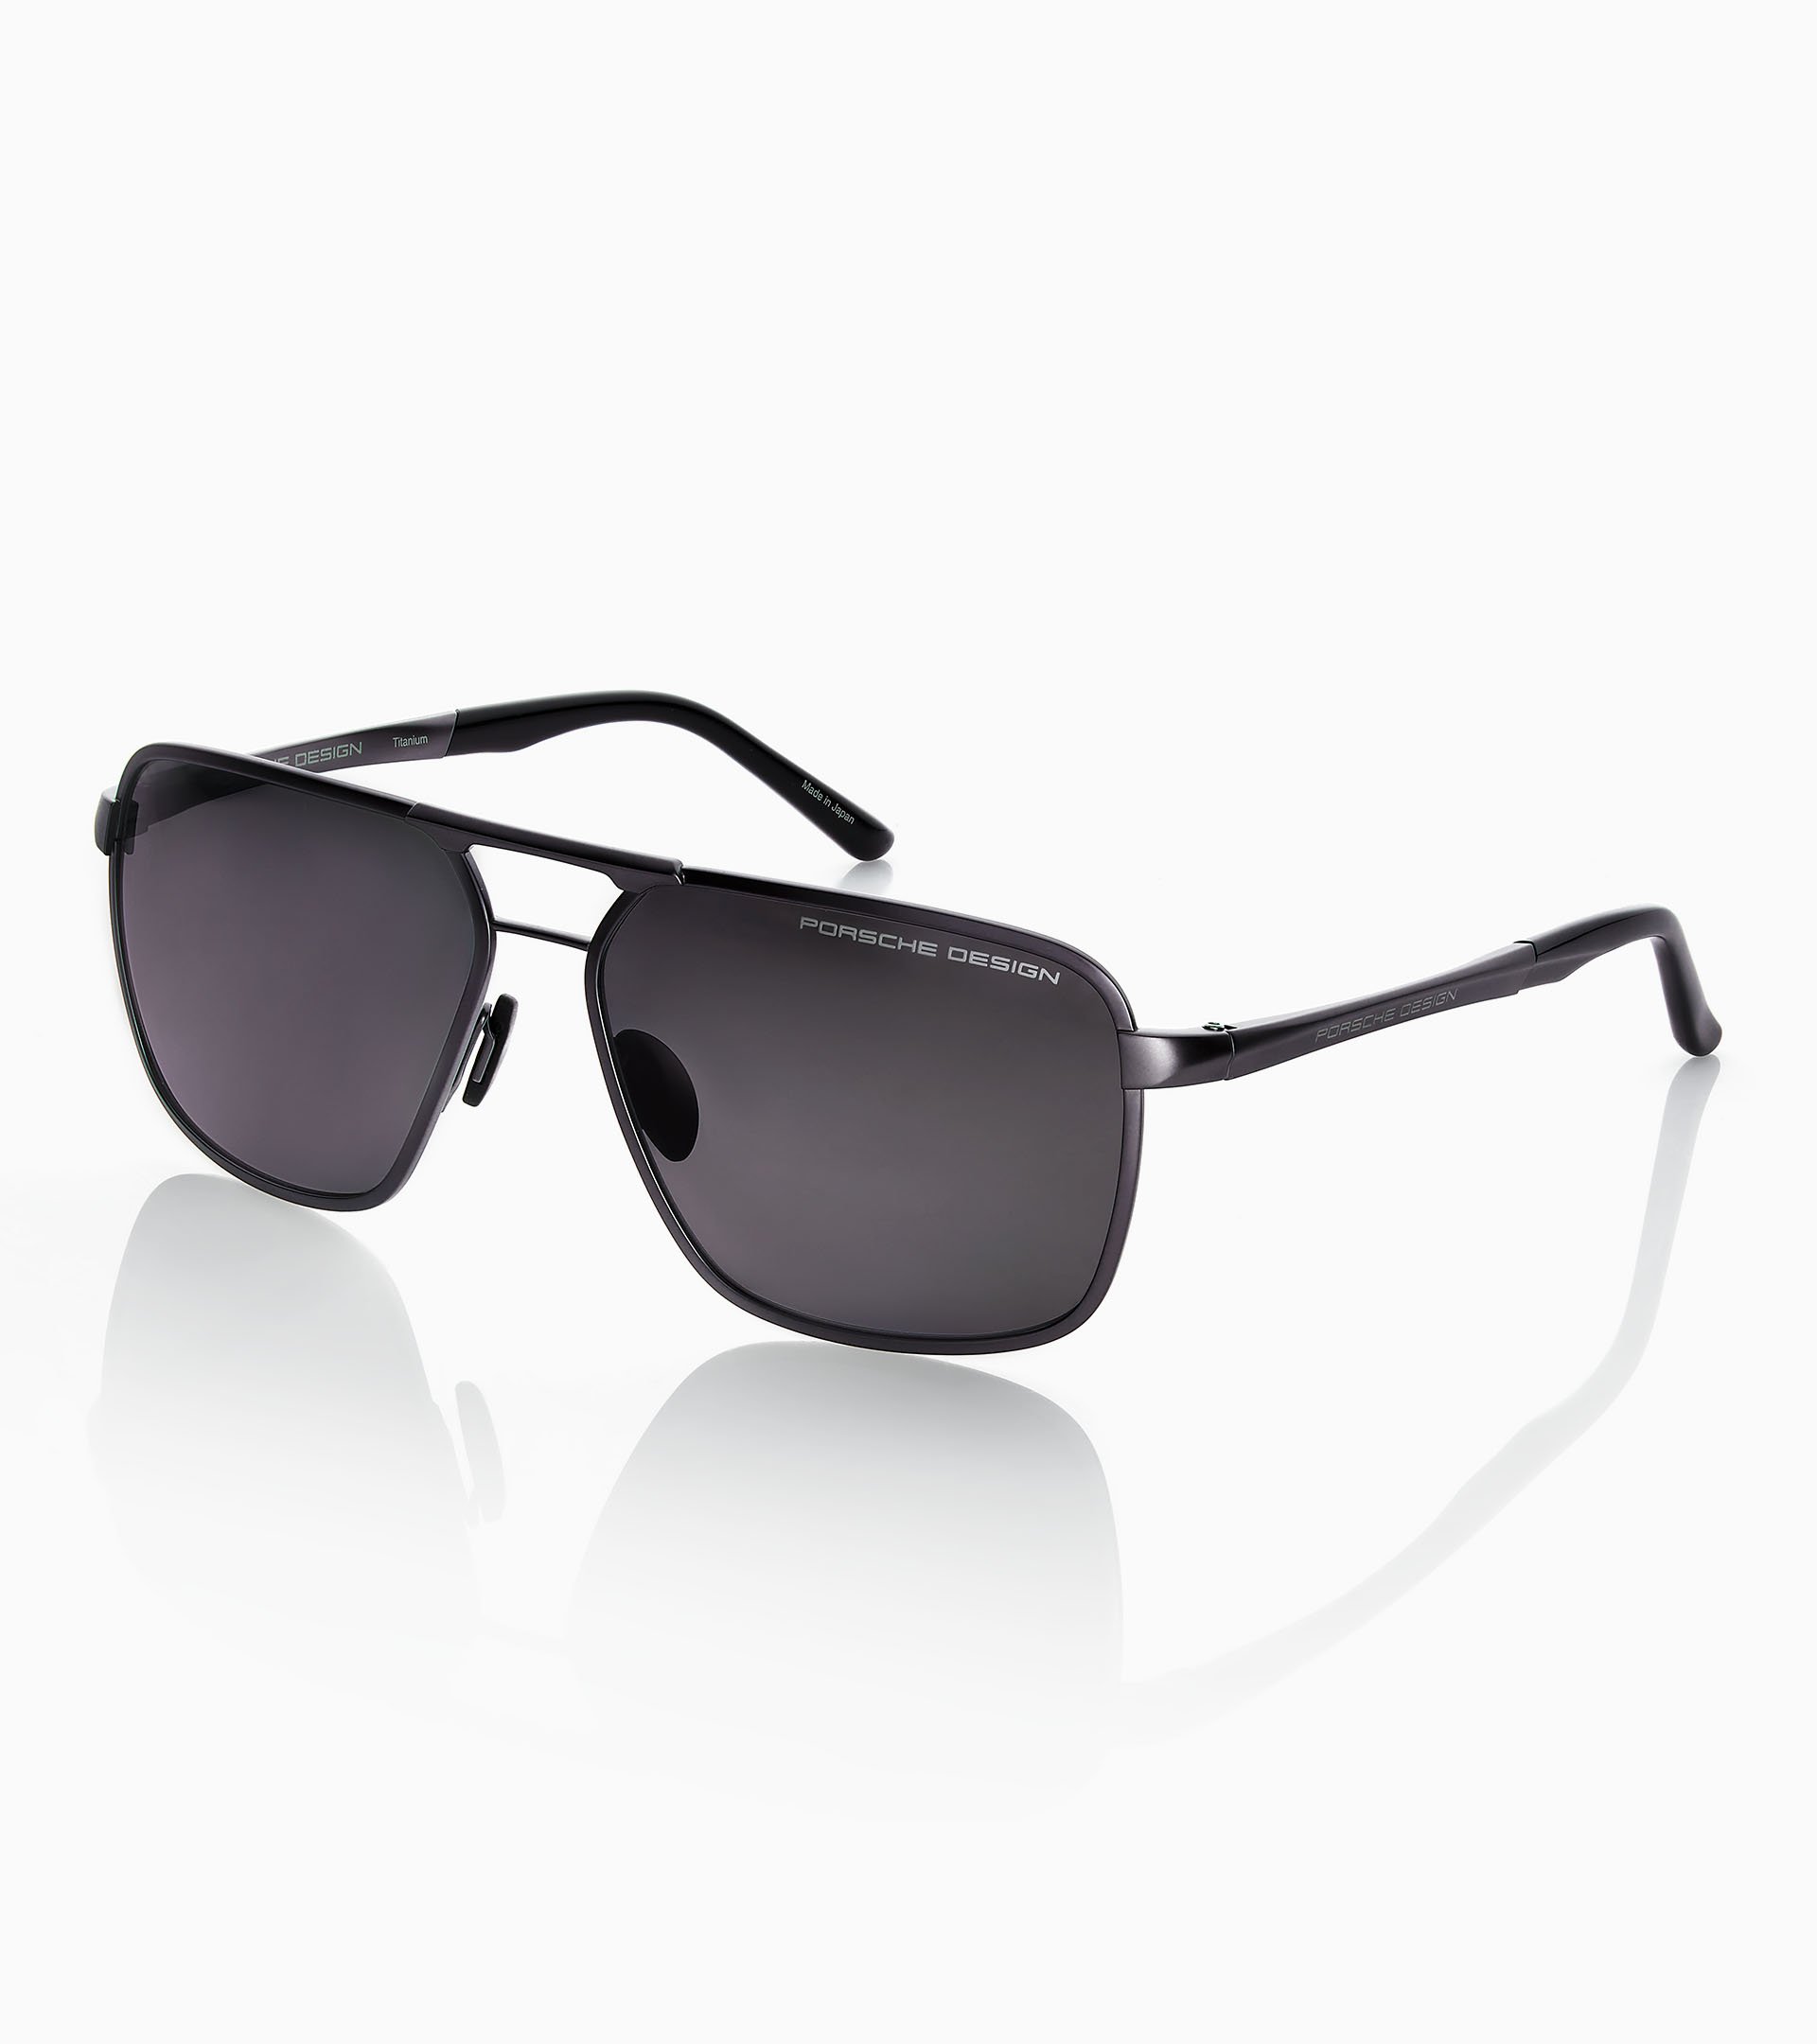 Jeepers Peepers slim angular sunglasses in black with yellow lens | ASOS